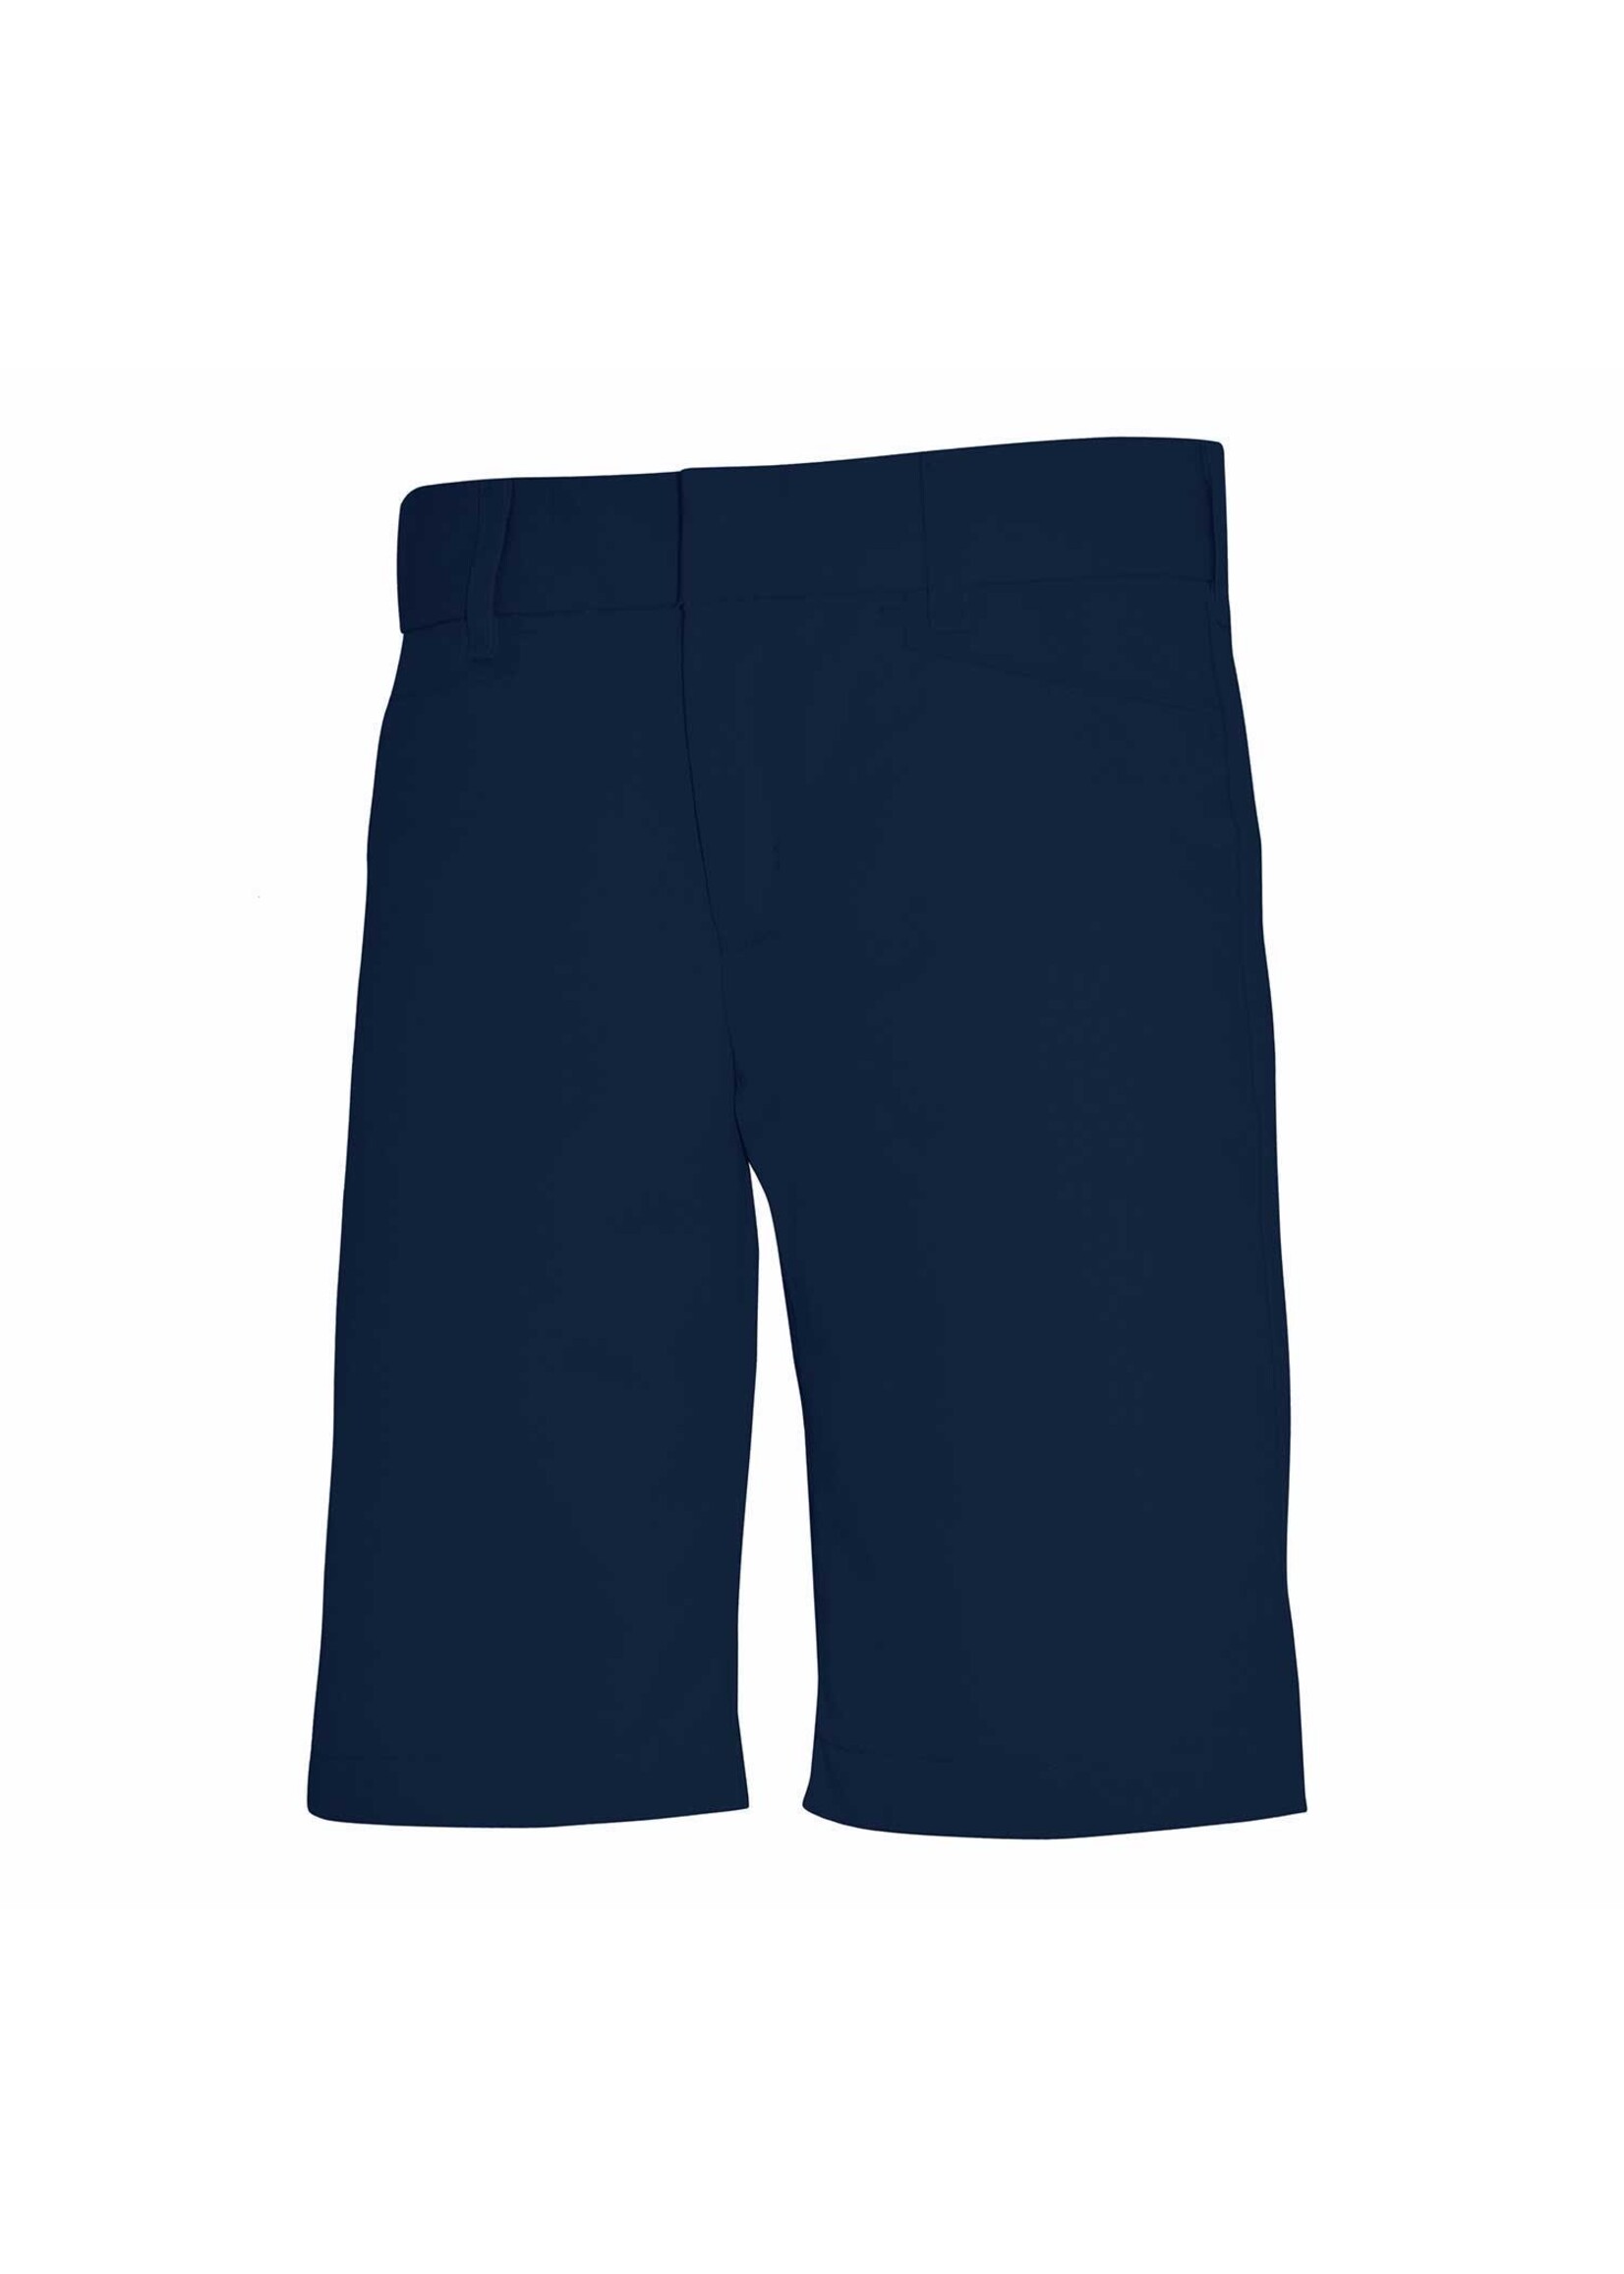 Girls Navy Mid Rise Flat Front Short with logo